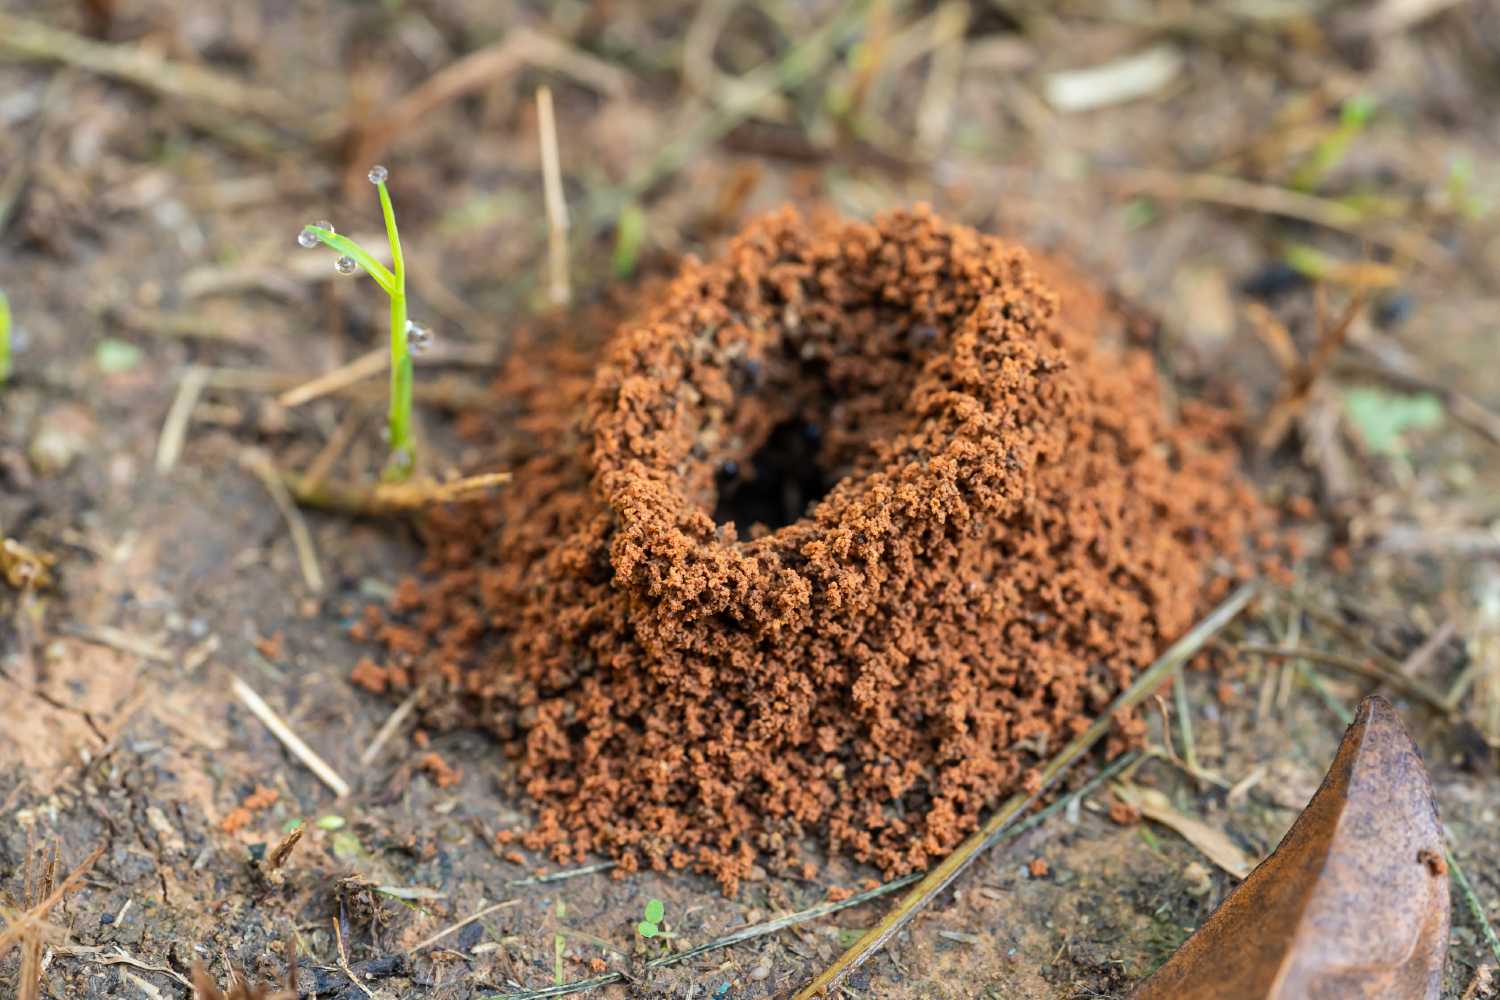 Sign of an ants nest